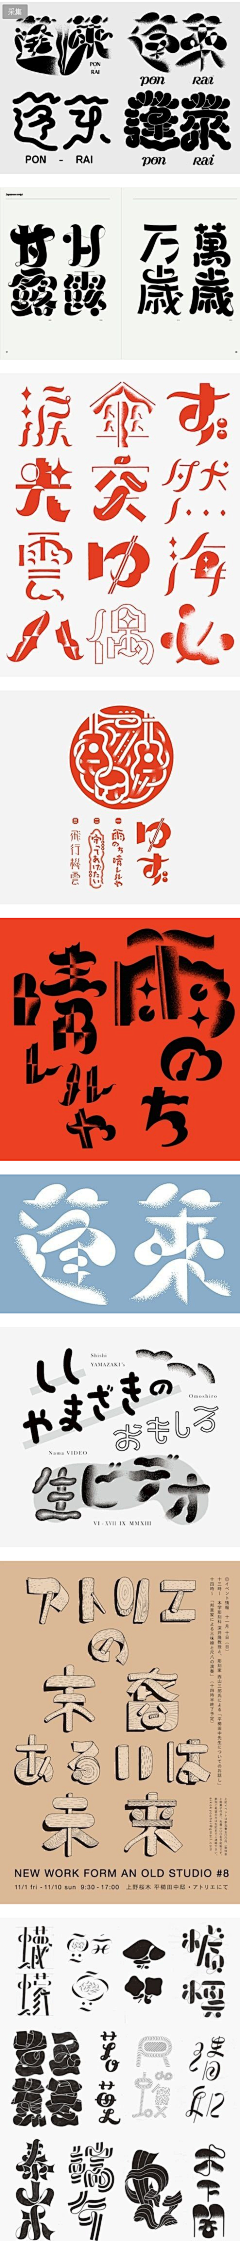 CounterSpell采集到字体设计